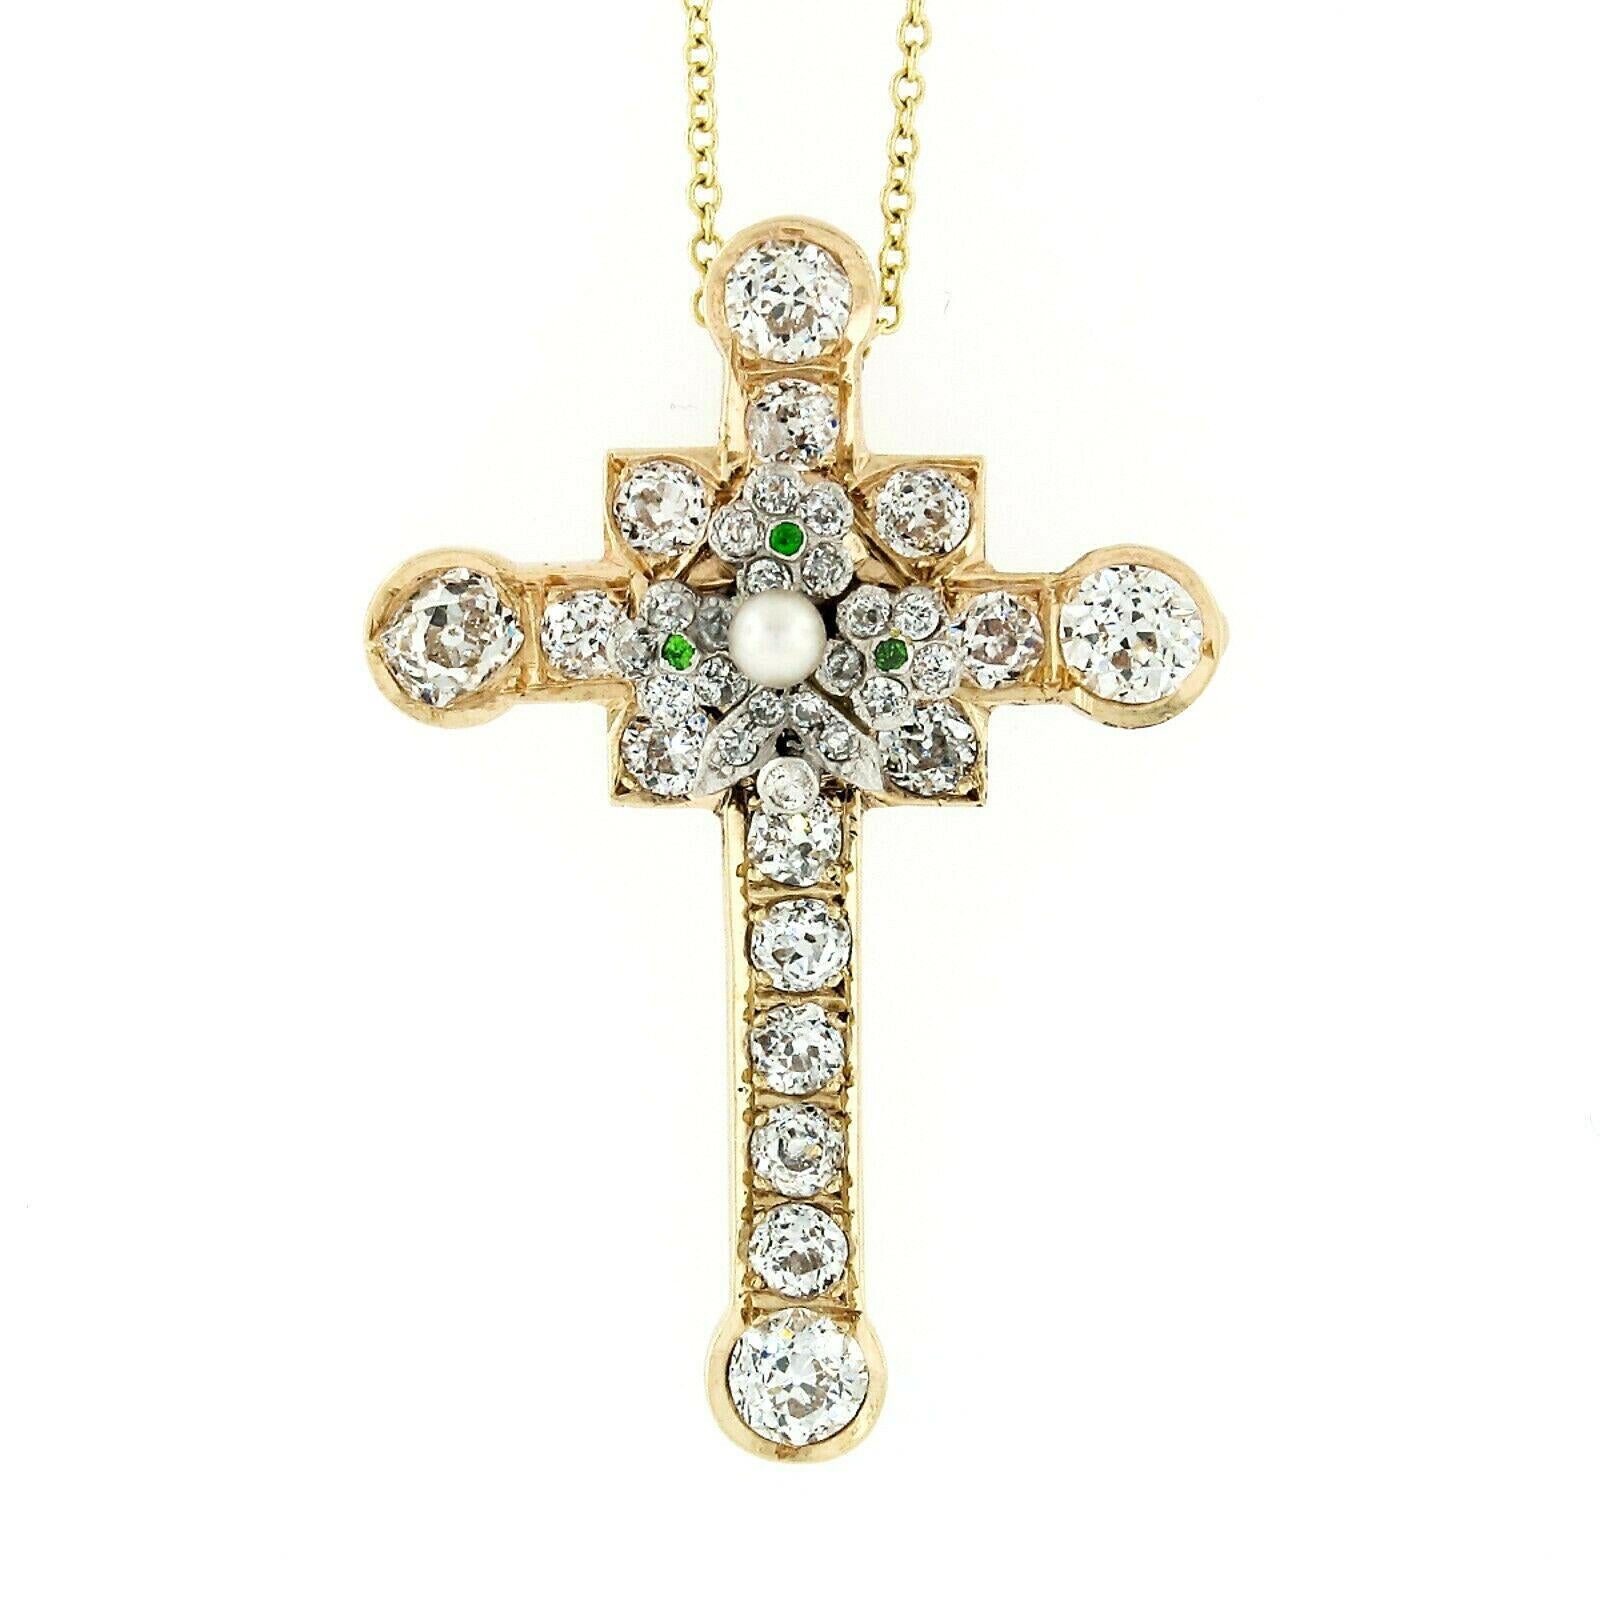 Here we have an absolutely stunning antique cross pendant that was crafted from solid 18k yellow and white gold during the Edwardian era. It truly stands out with its 4 large old mine cut diamonds totaling approximately 1.52 carats in weight, each